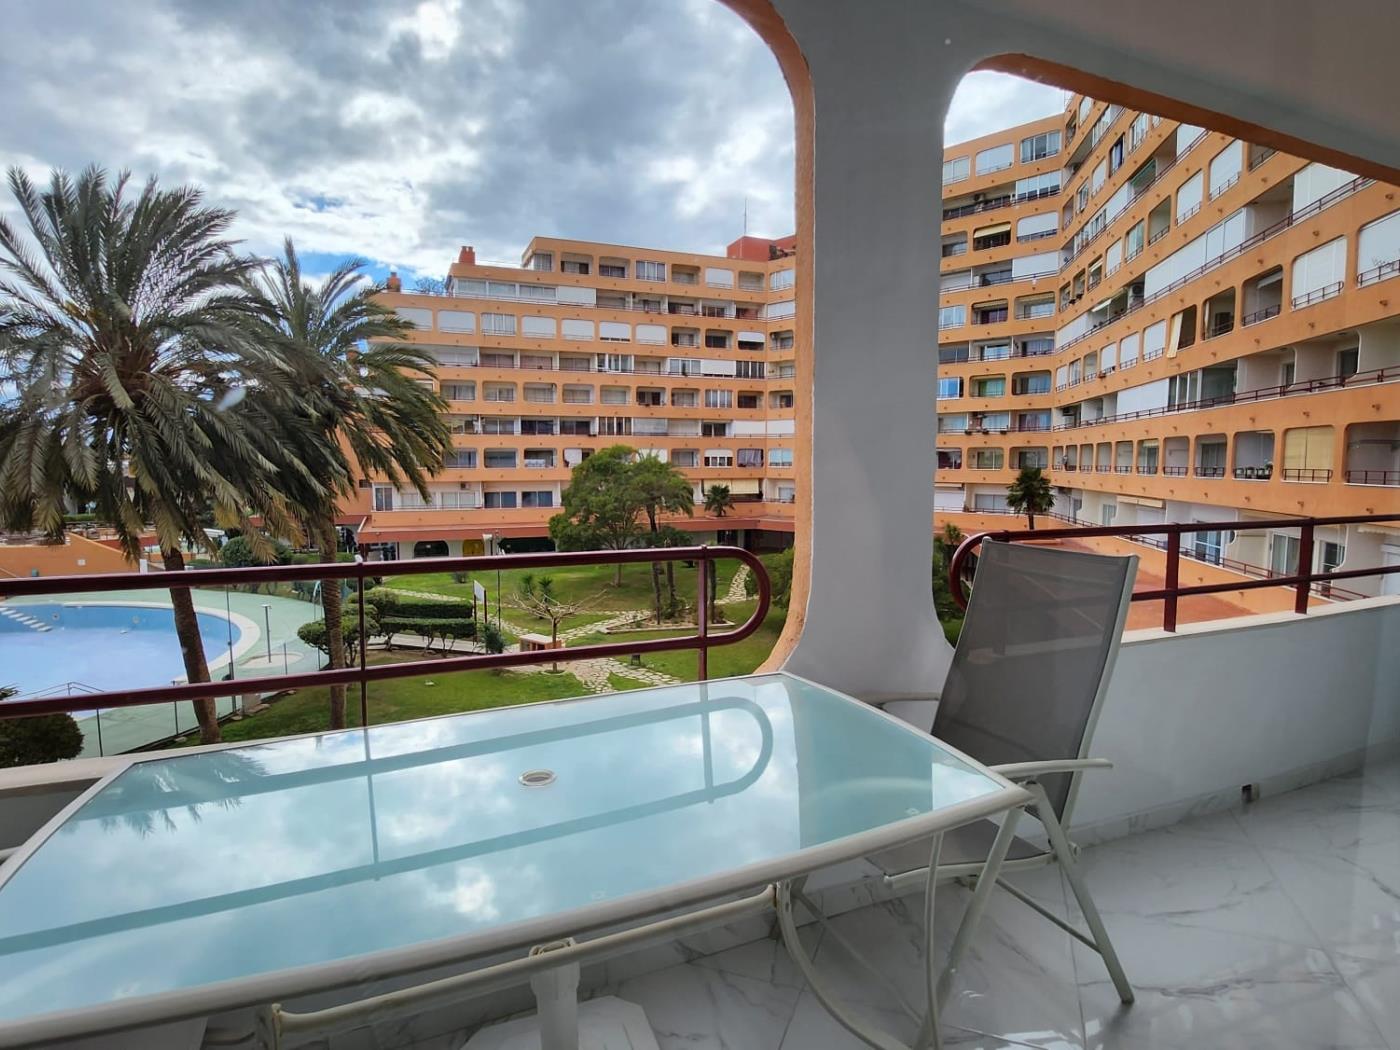 2 Bedroom apartment with sea view and canal 00117 in ROSES